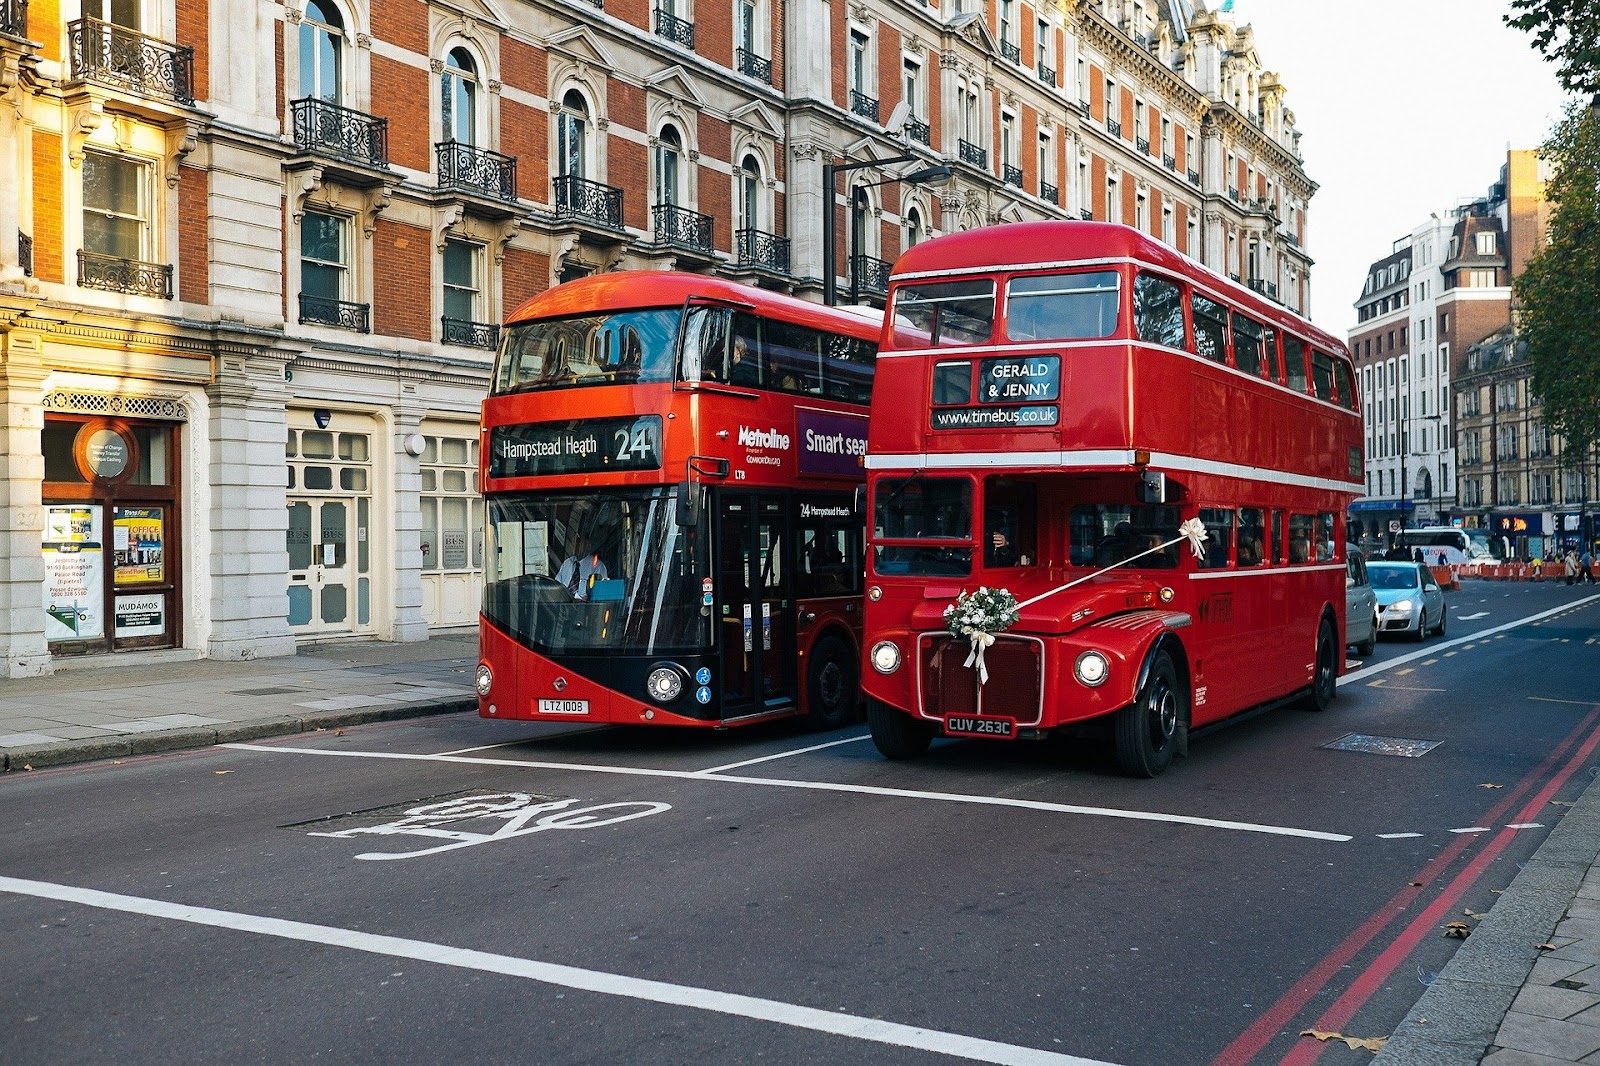 two red double-decker buses